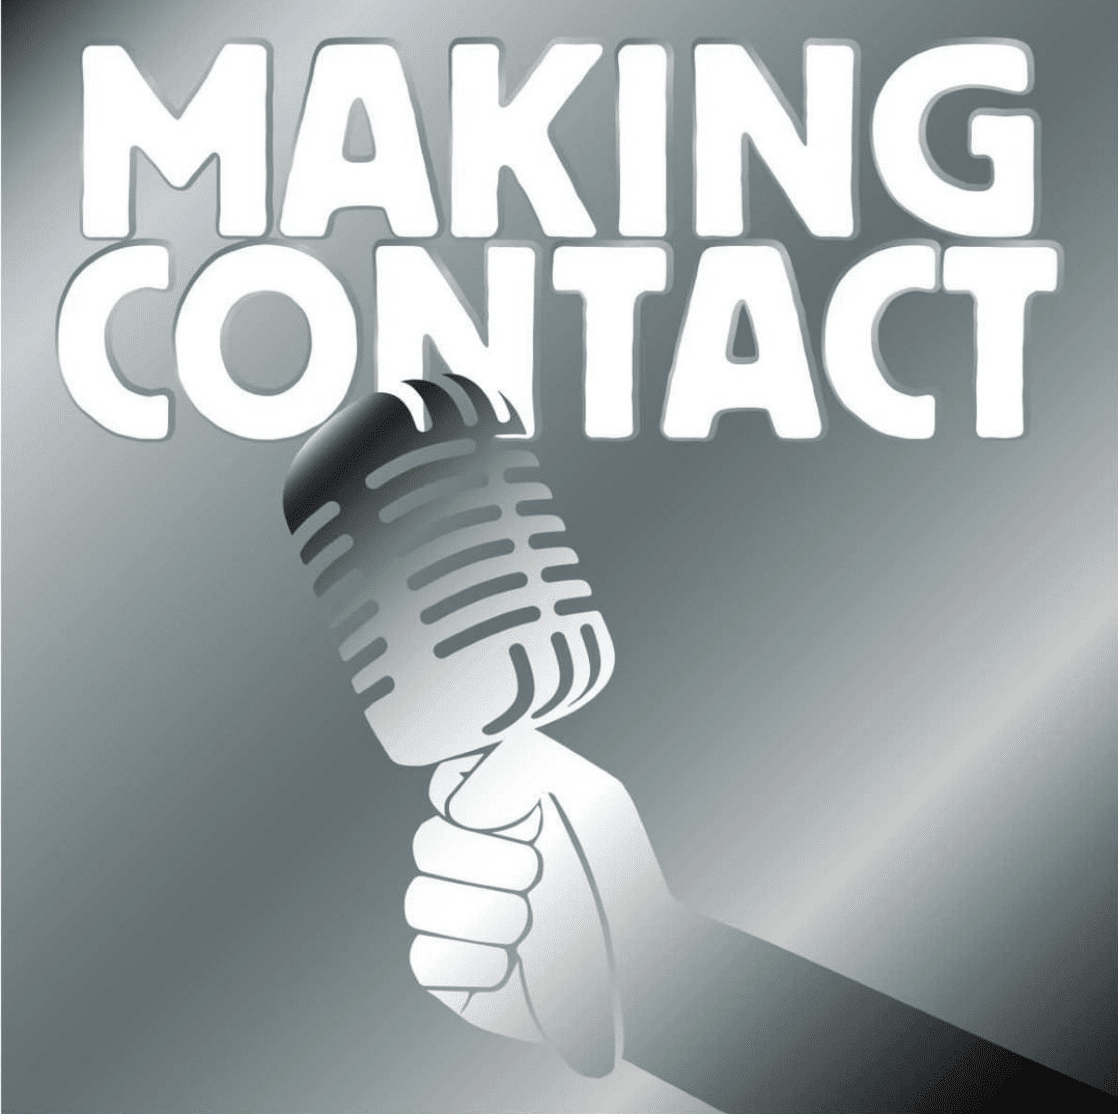 Adapting? Excerpting? Excerpts interwoven with filmmaker interview? Making Contact at www